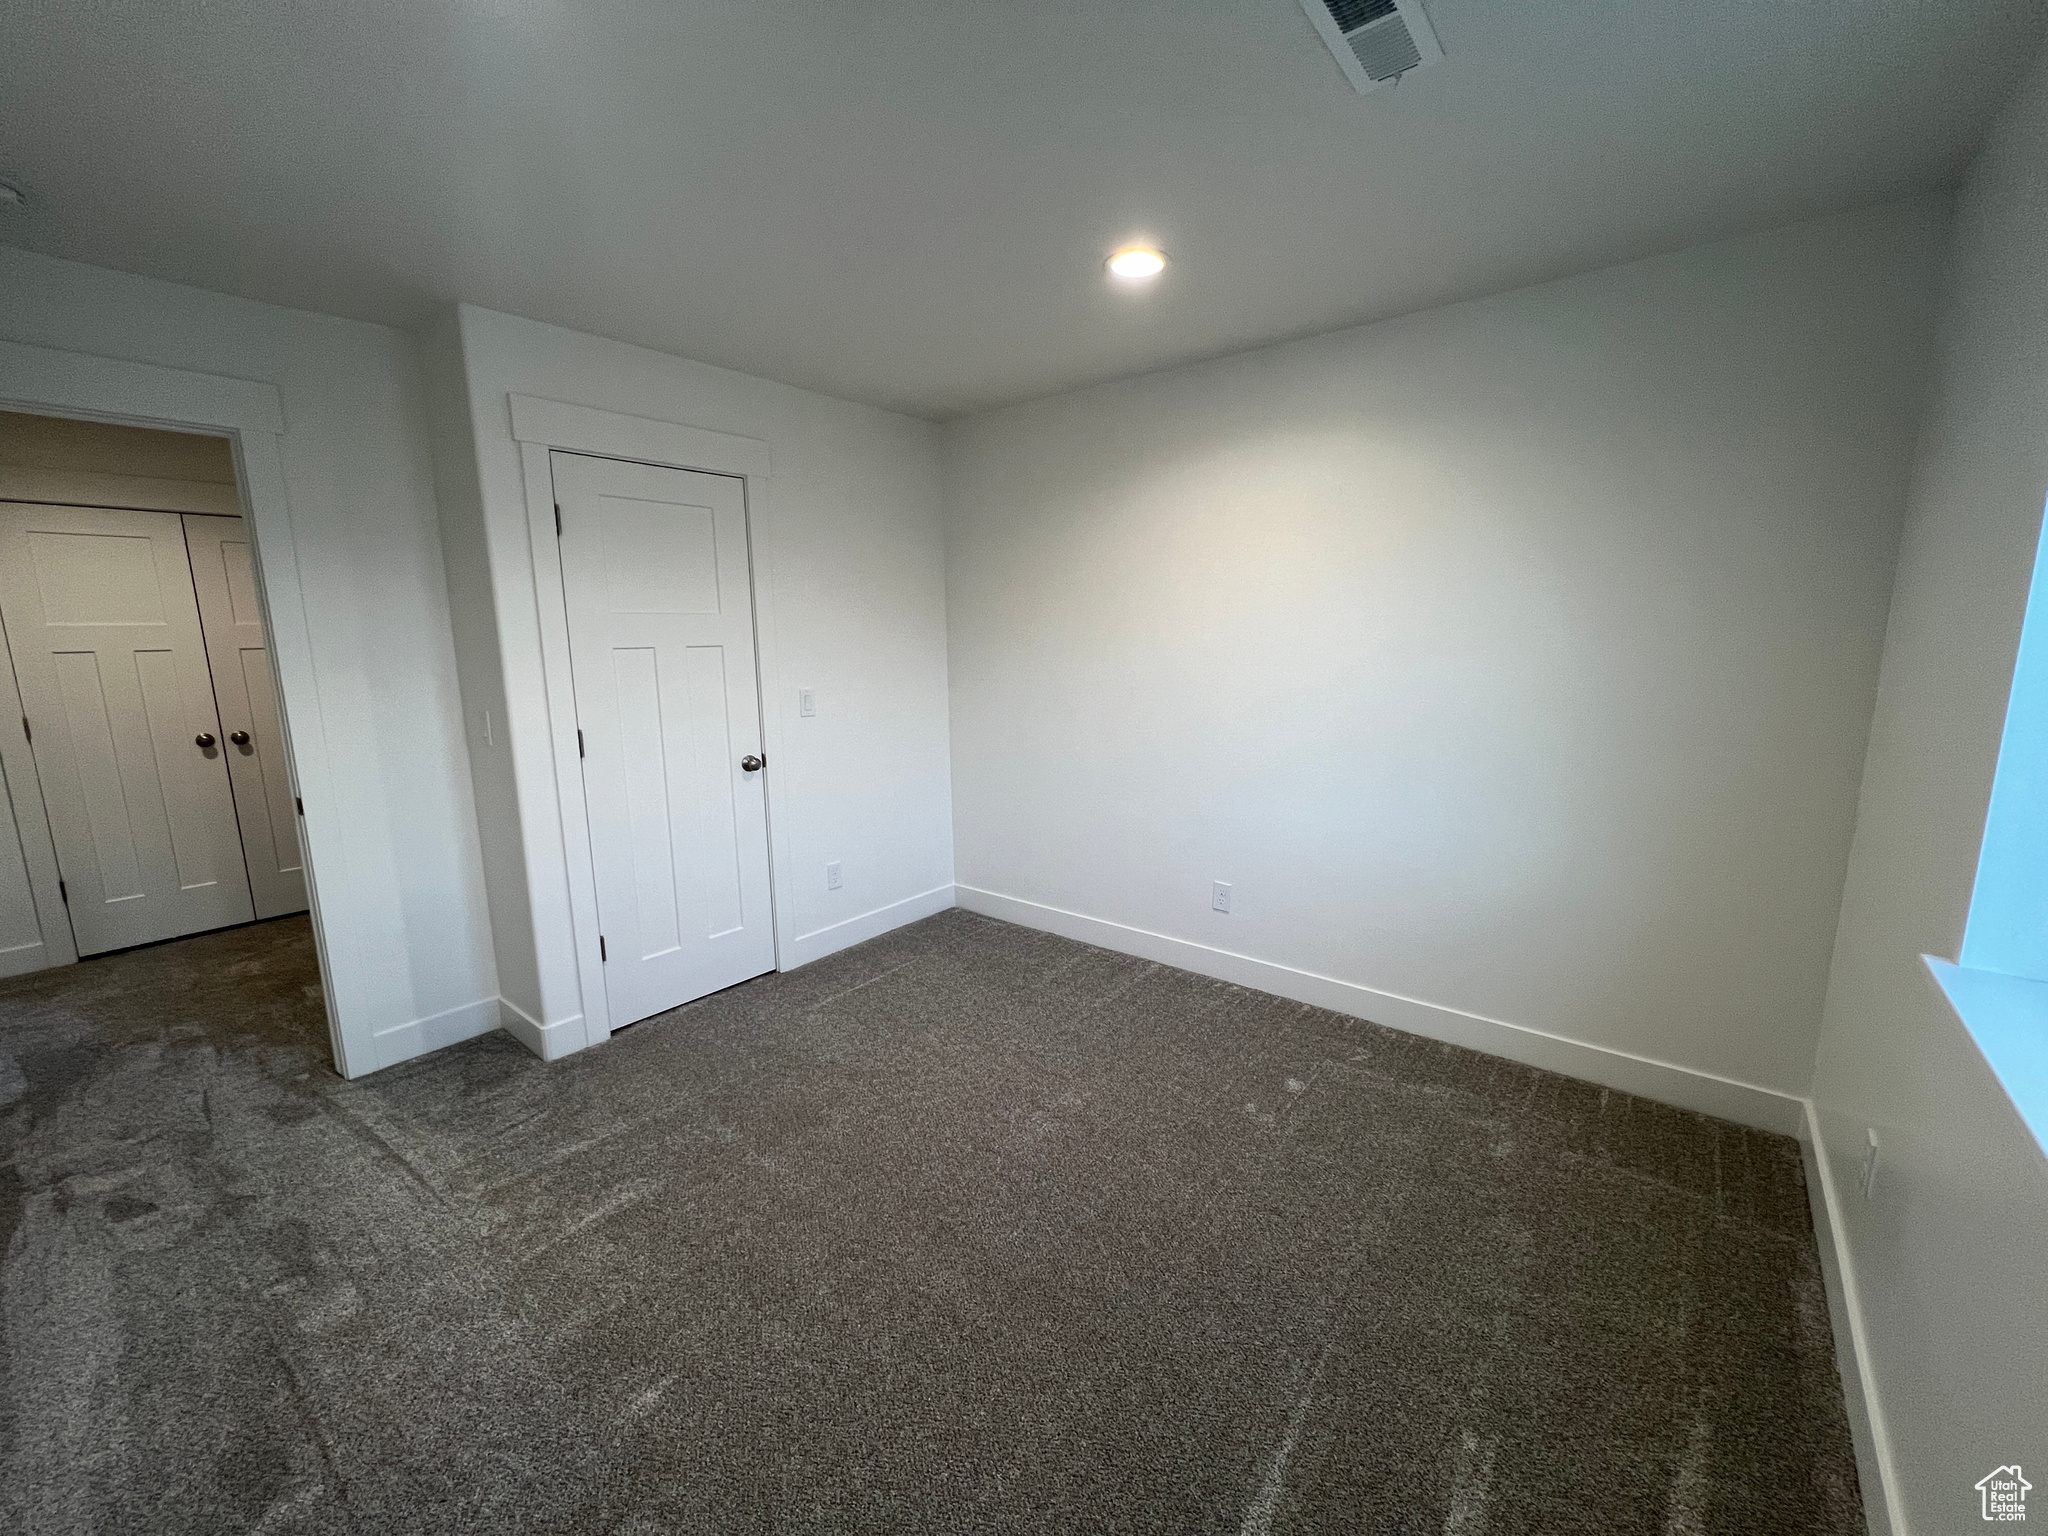 Unfurnished Guest bedroom 2 with dark colored carpet and a closet